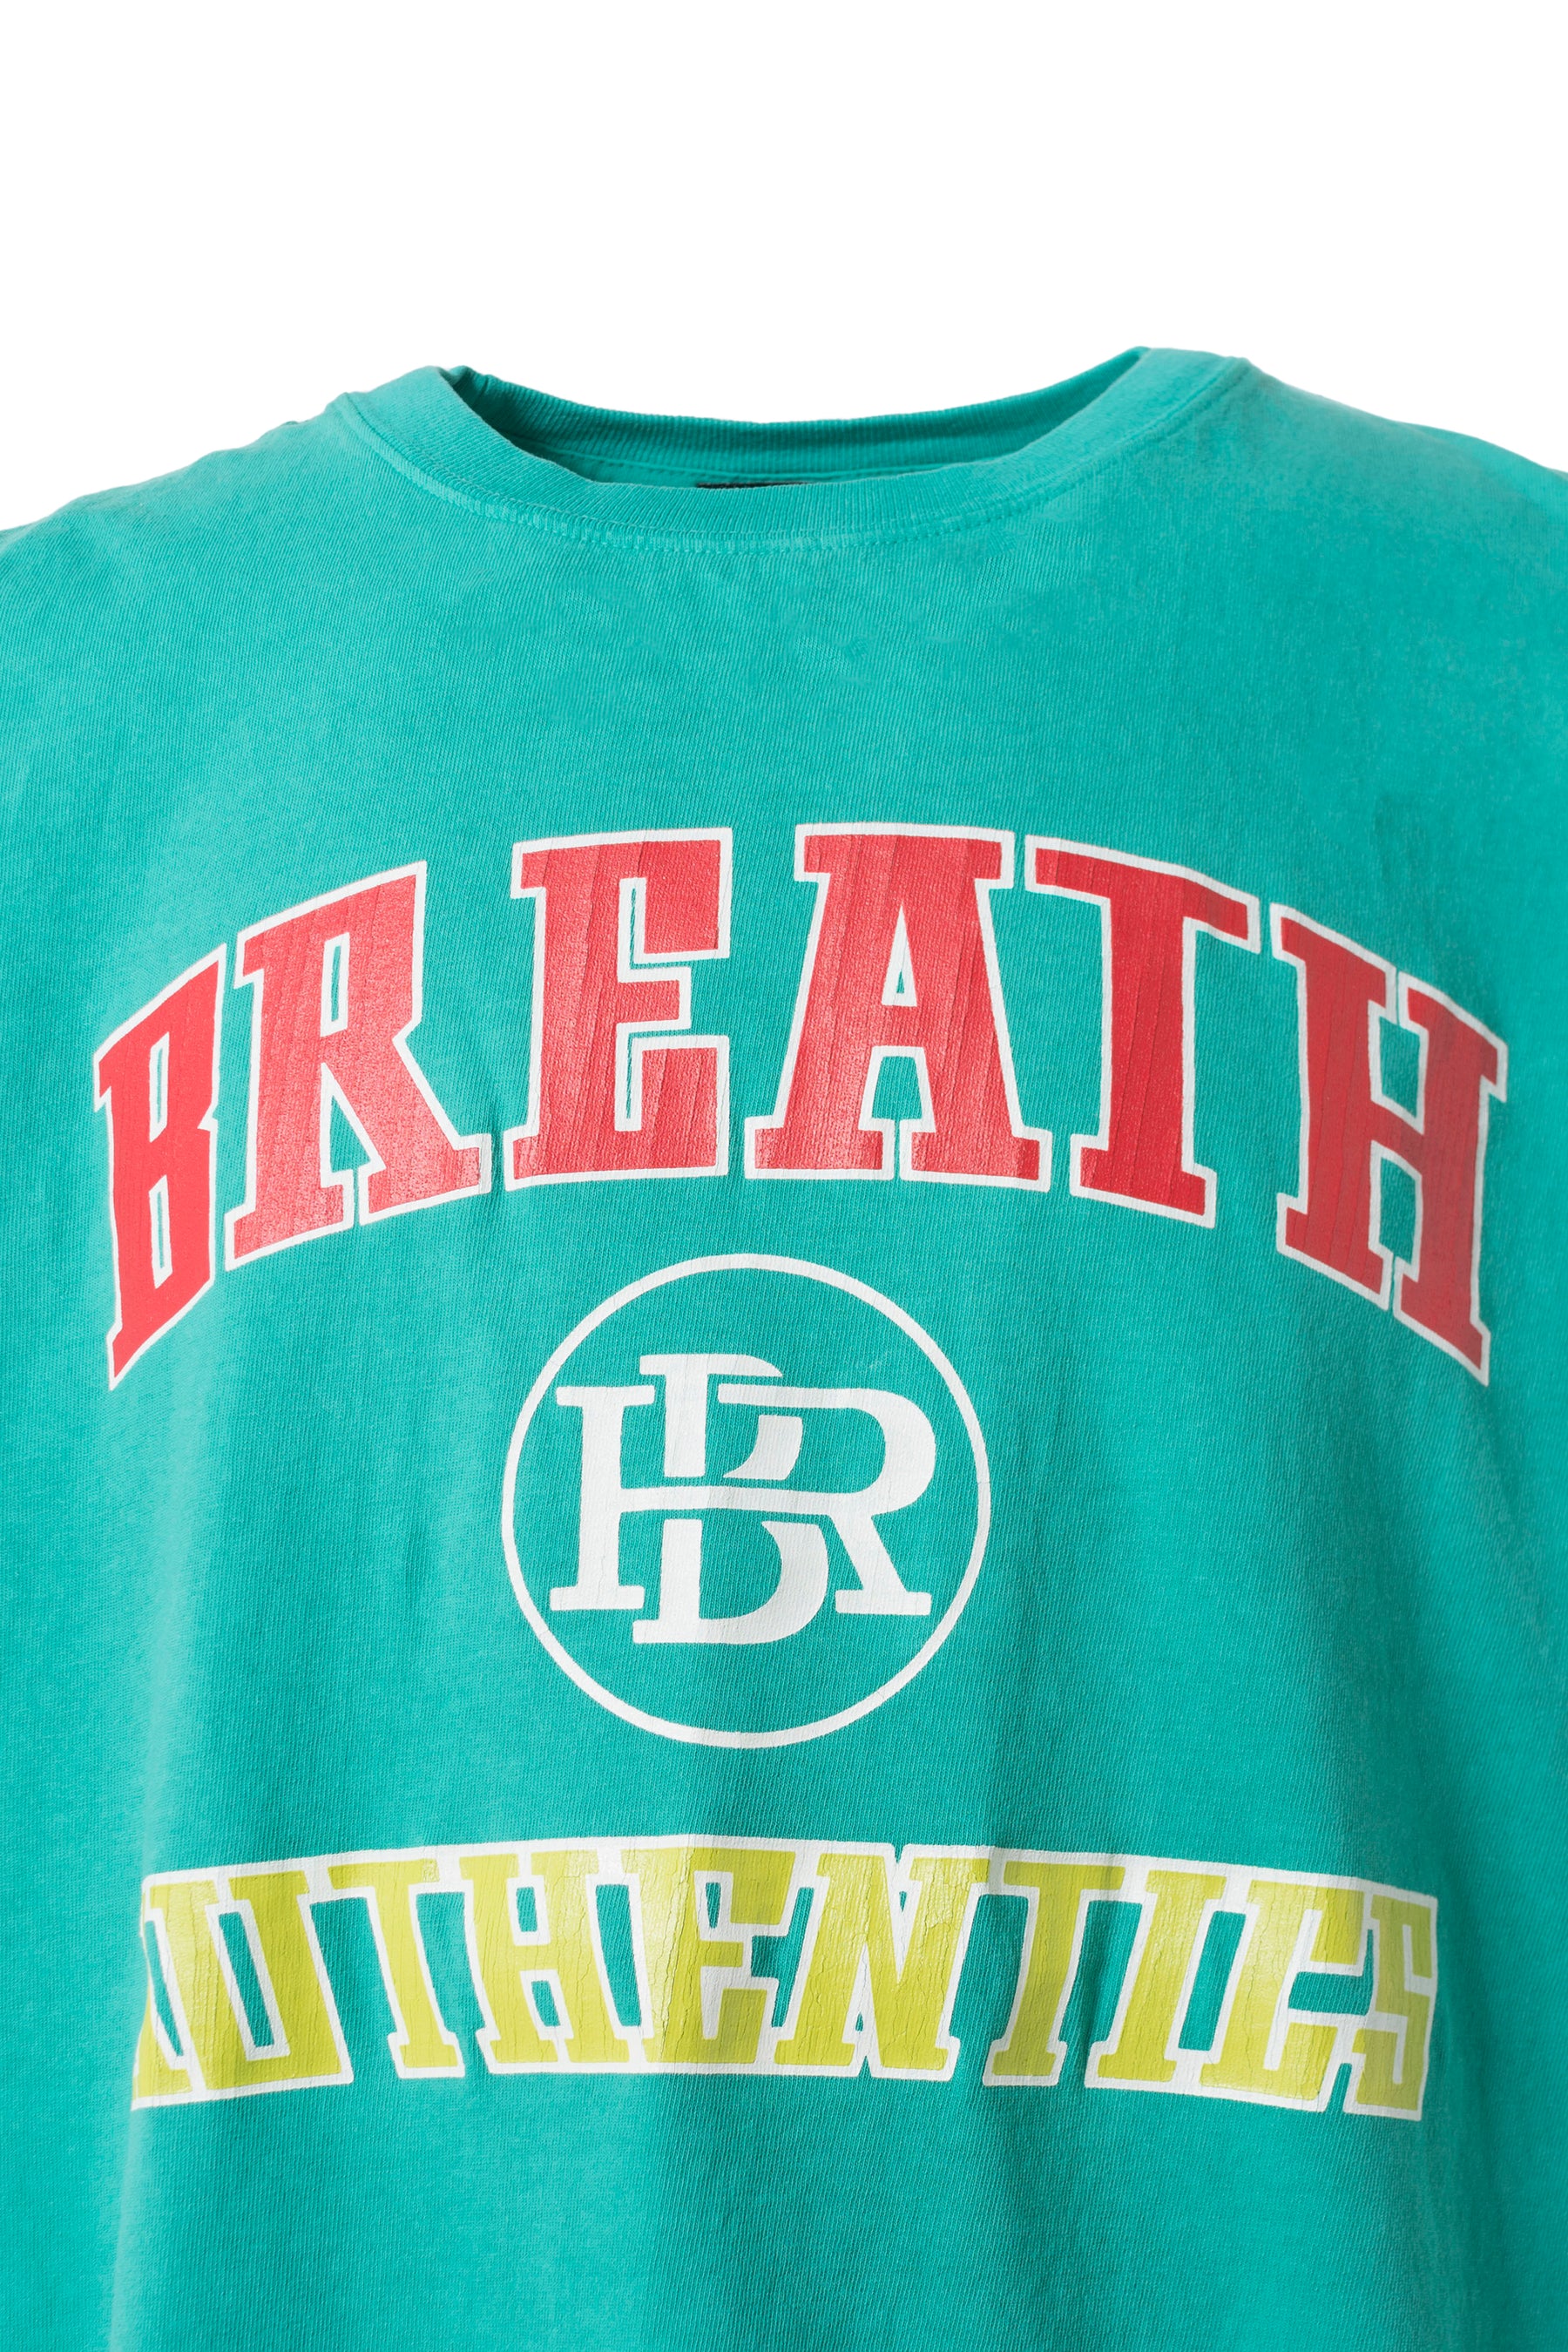 BREATH AUTHENTIC TEE / GRN